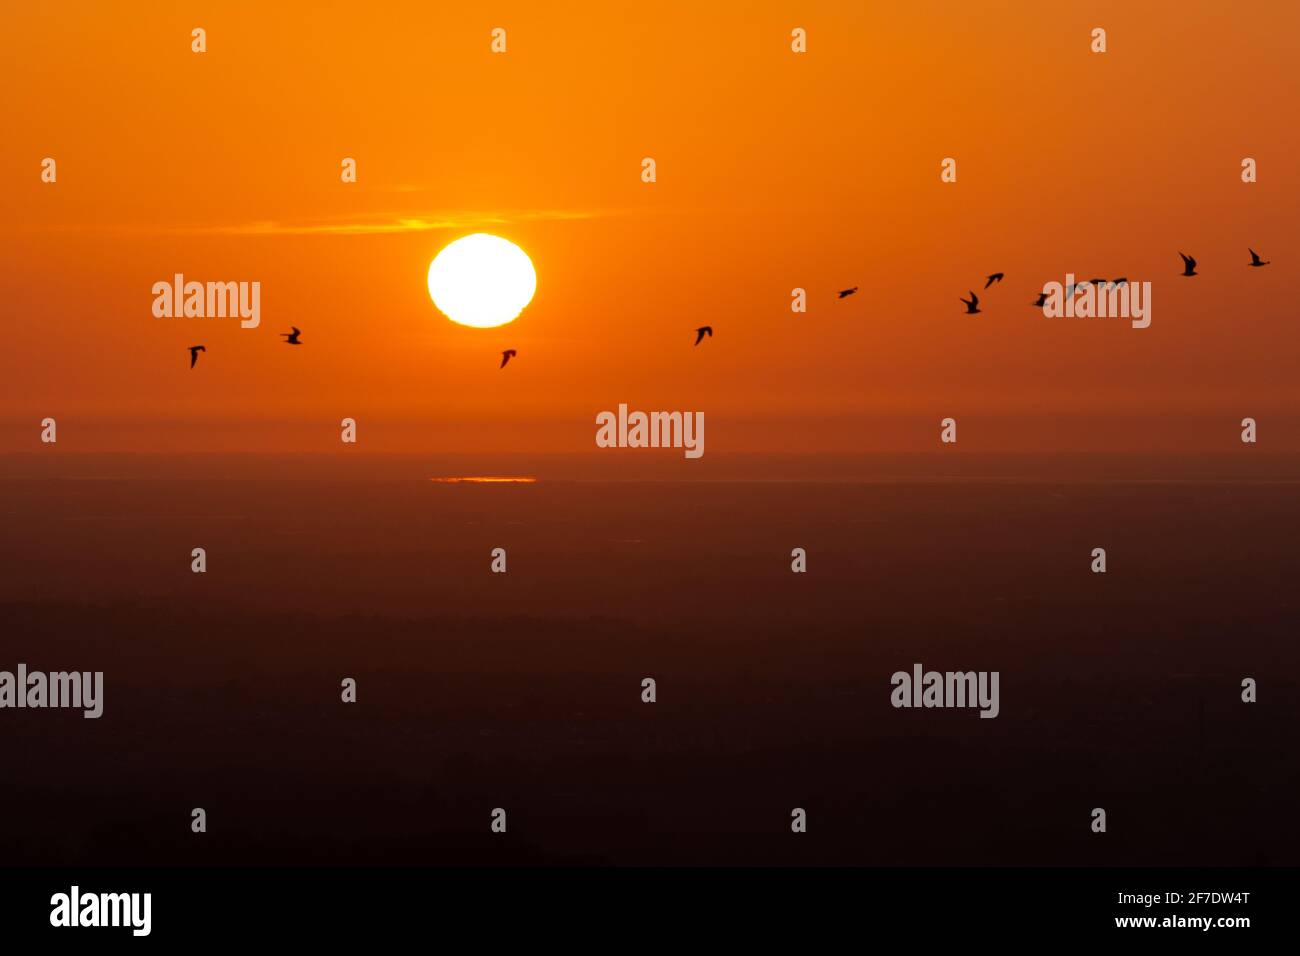 Sunset over a true horizon where sky meets the sea. A flock of birds fly past the disc of the sun in a mostly cloudless bright orange sky. UK sunset Stock Photo